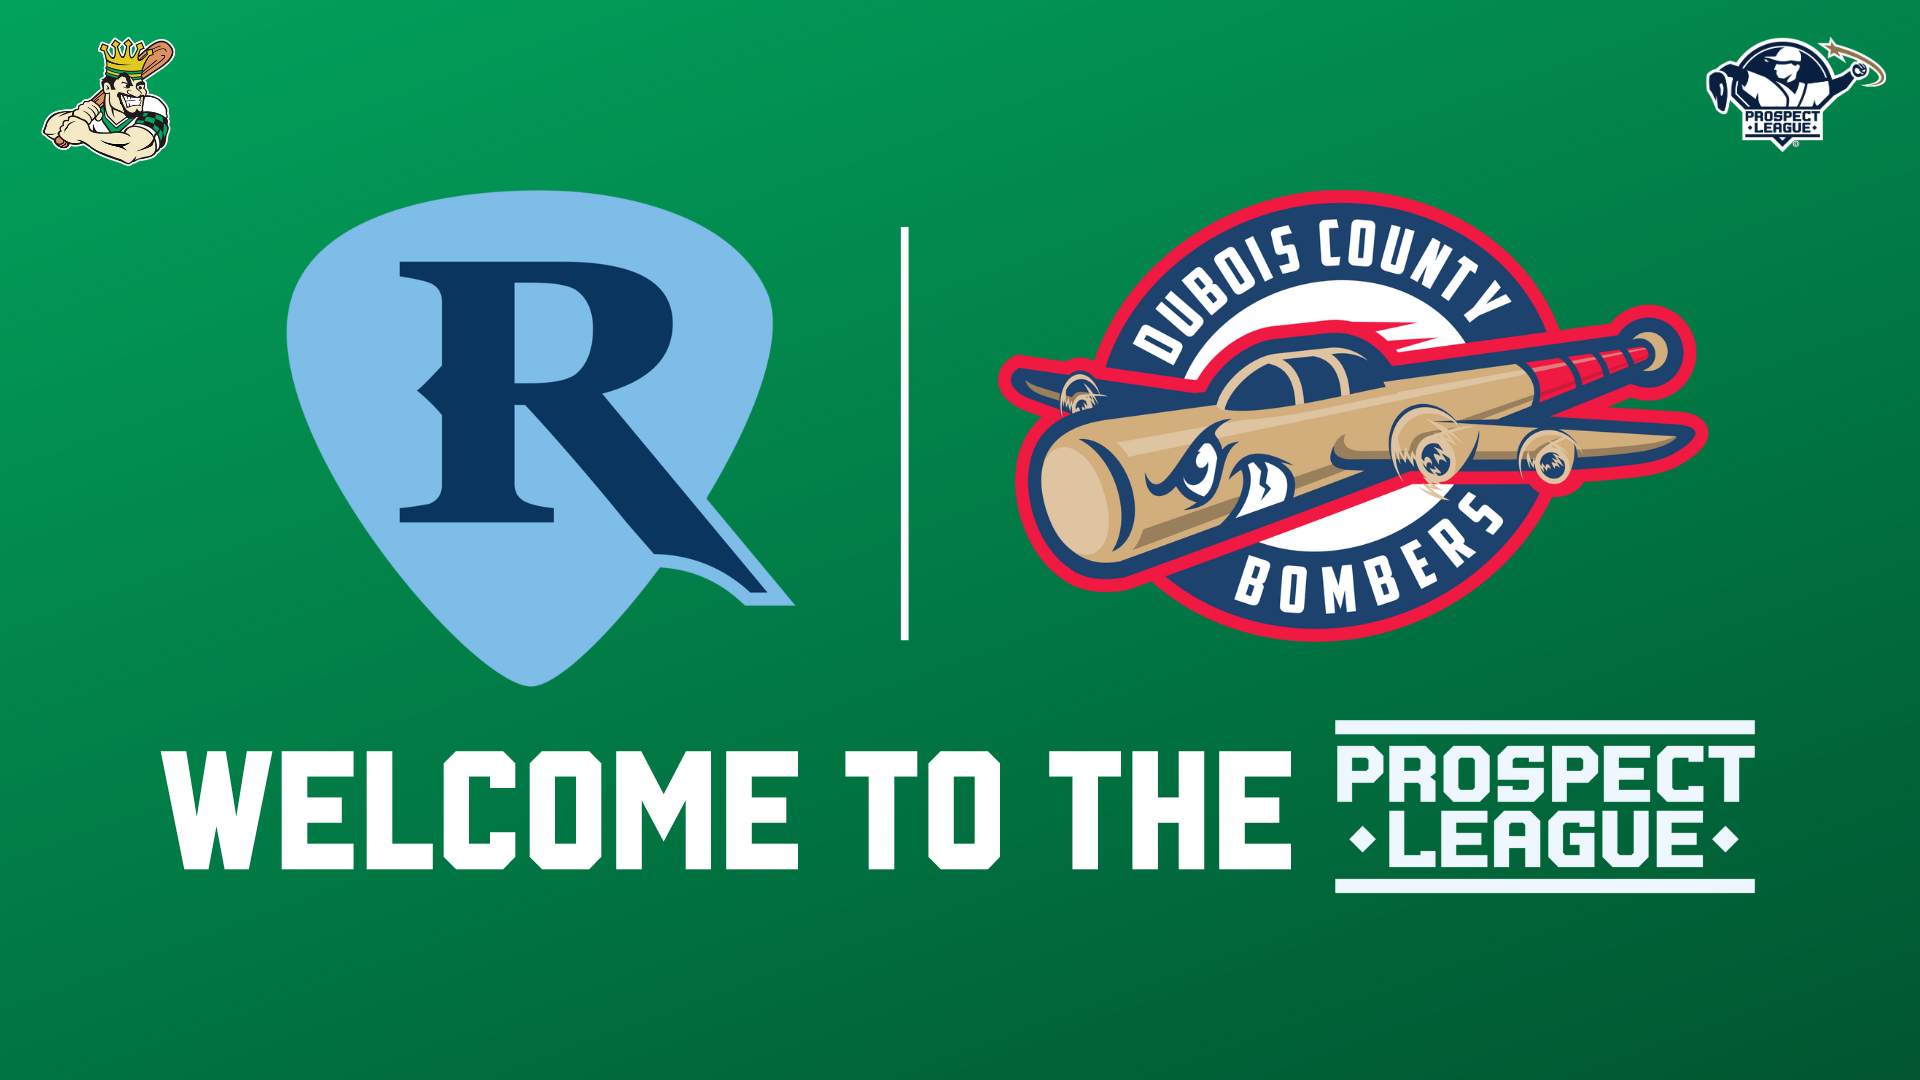 Prospect League Welcomes Dubois County Bombers and Full Count Rhythm